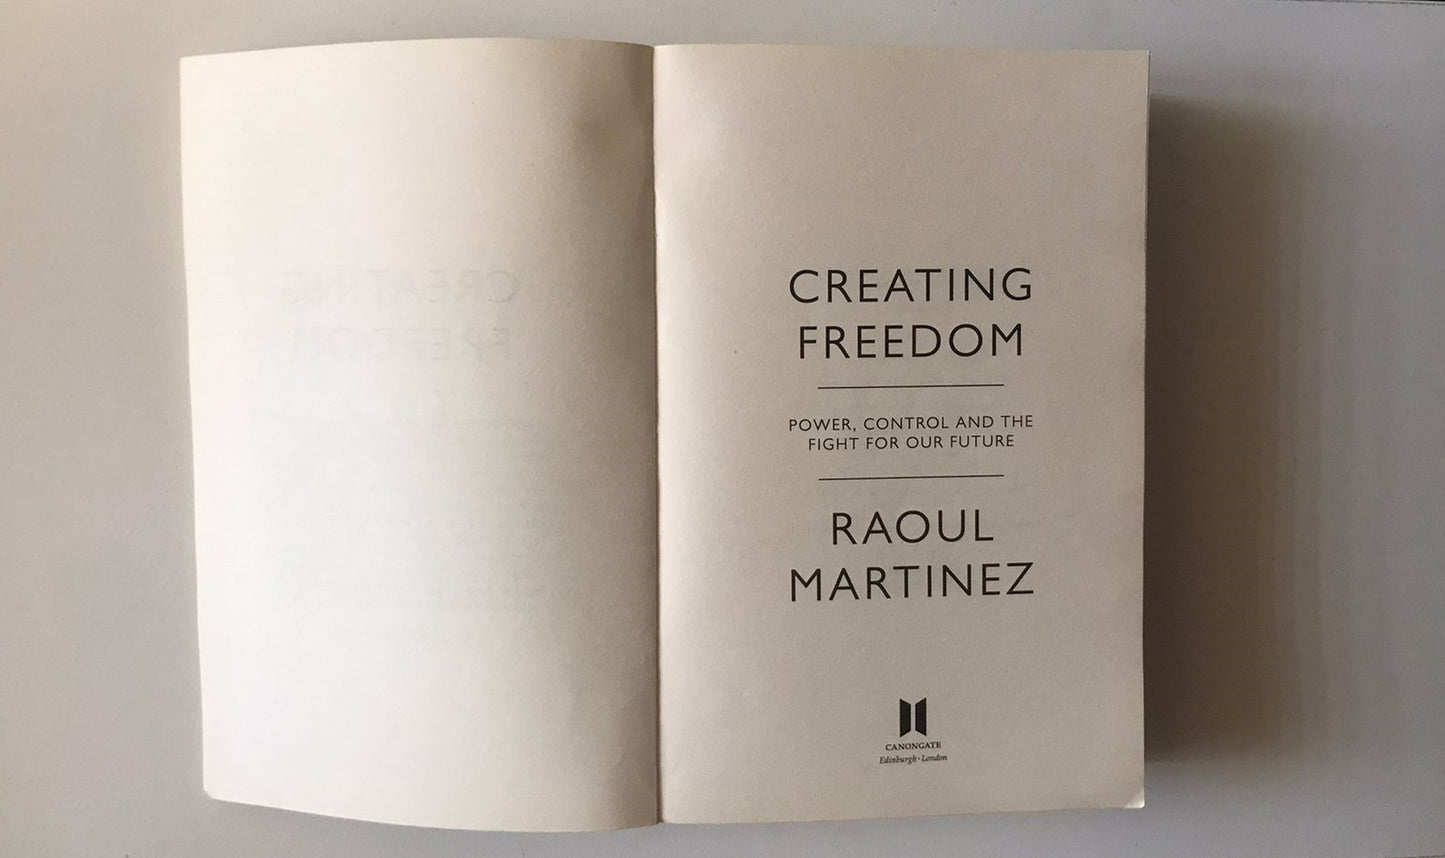 Creating freedom: Power, control and the fight for our freedom - Raoul Martinez